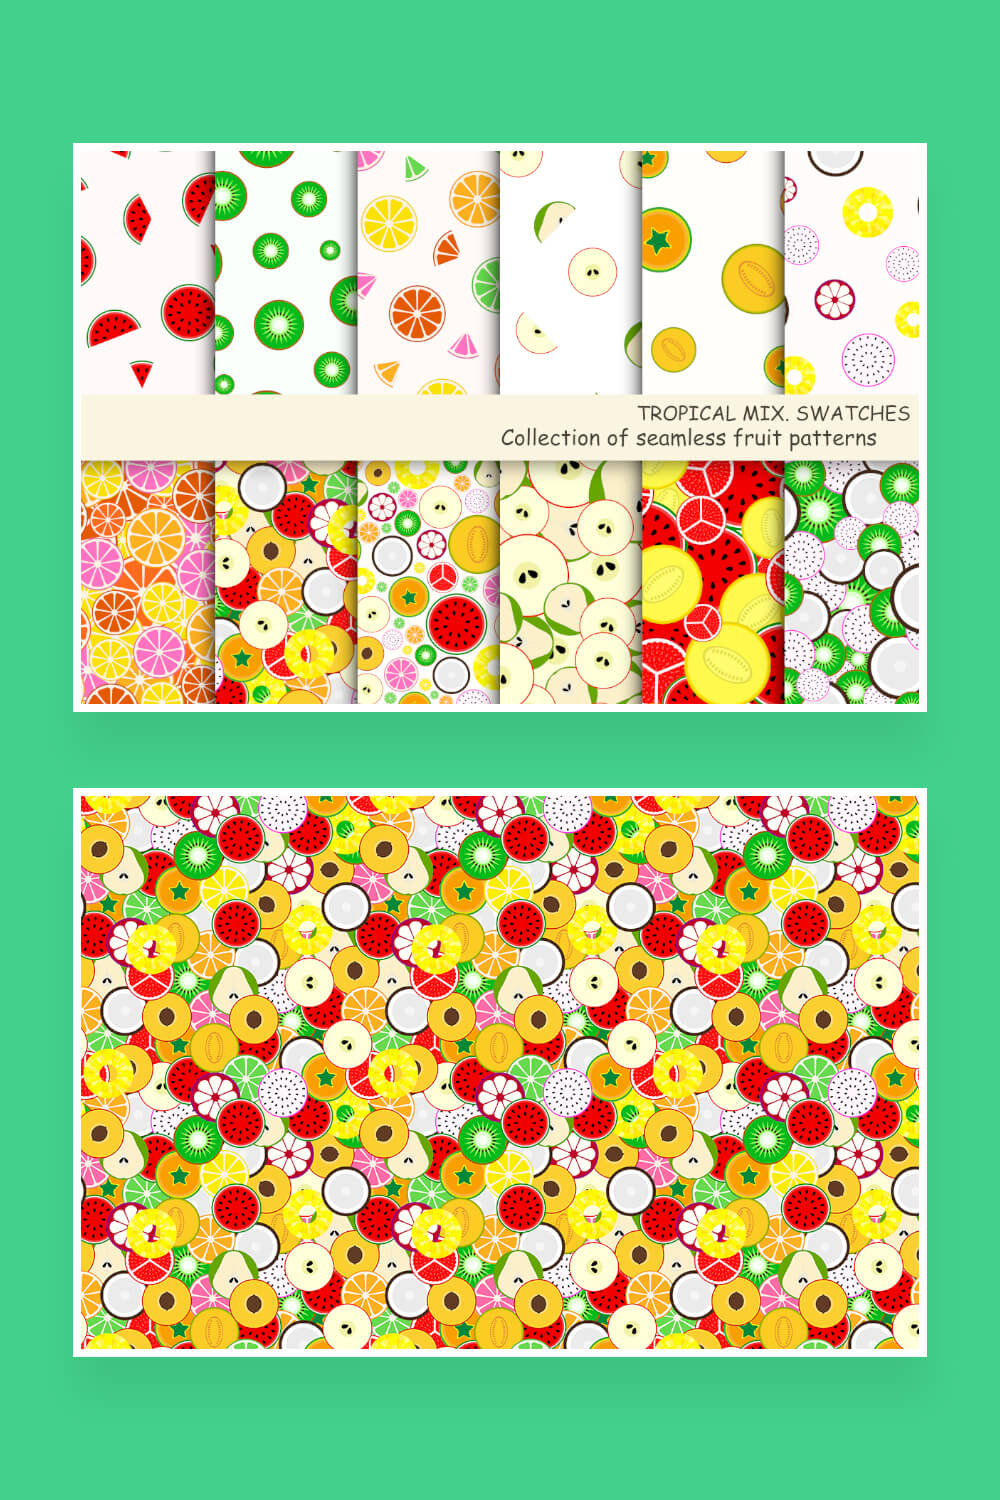 collection of seamless fruit patterns swatches pinterest image